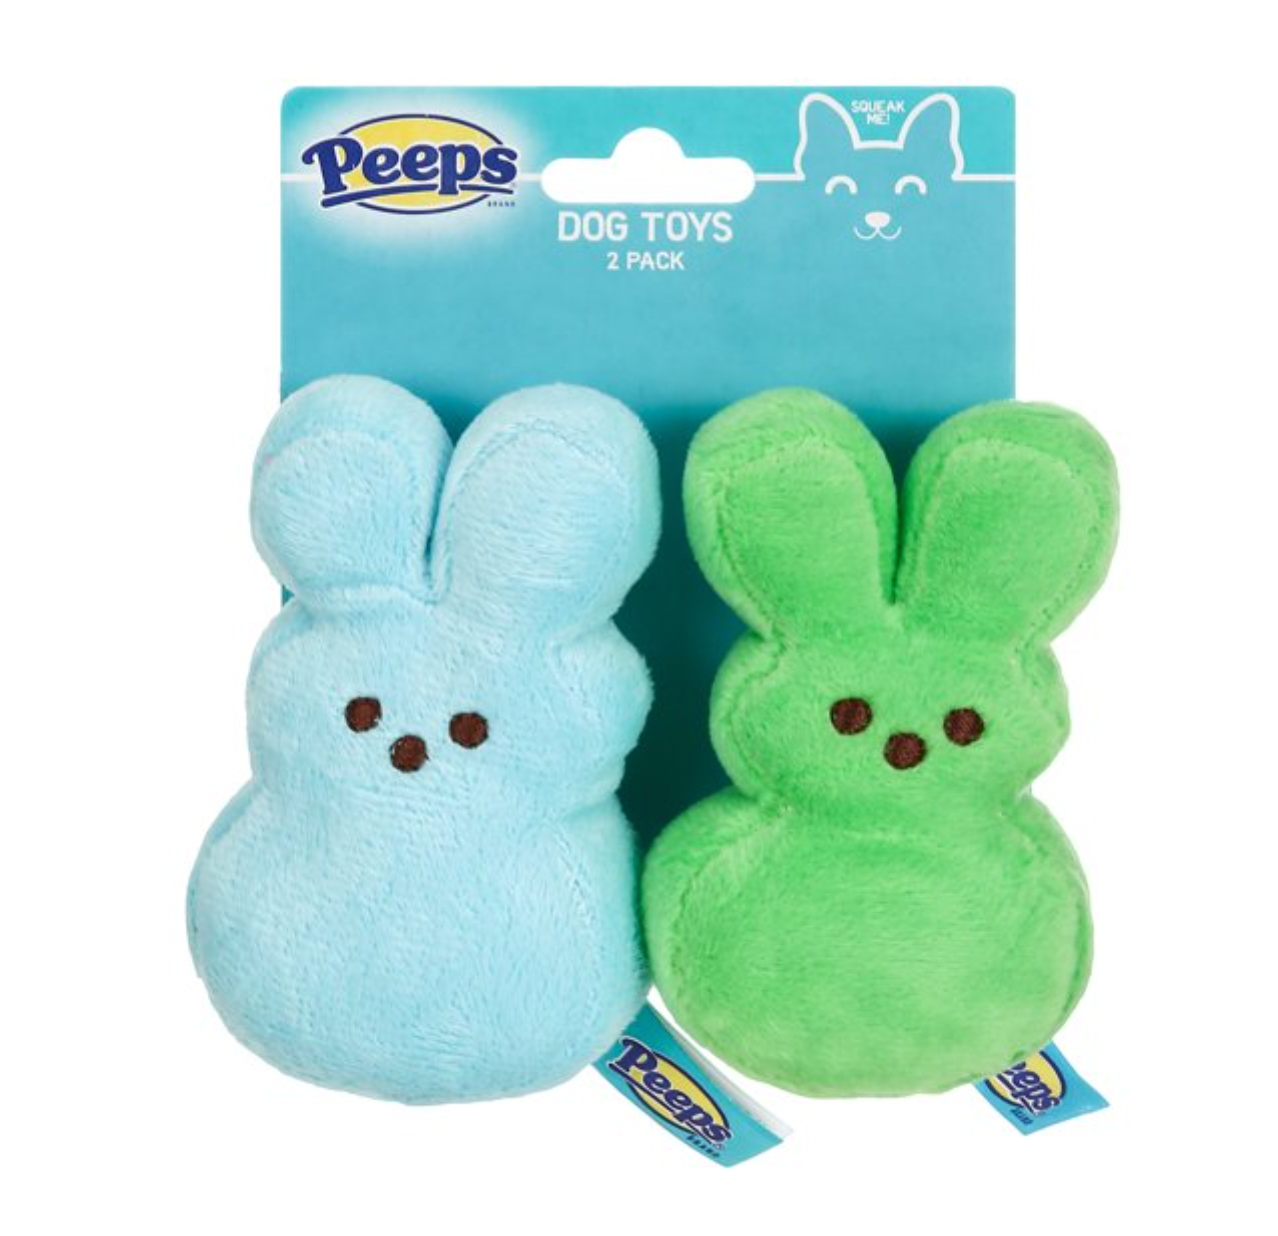 Peeps Easter Peep Plush Blue Green Bunnies 4in Pet 2pk Toy New with Card